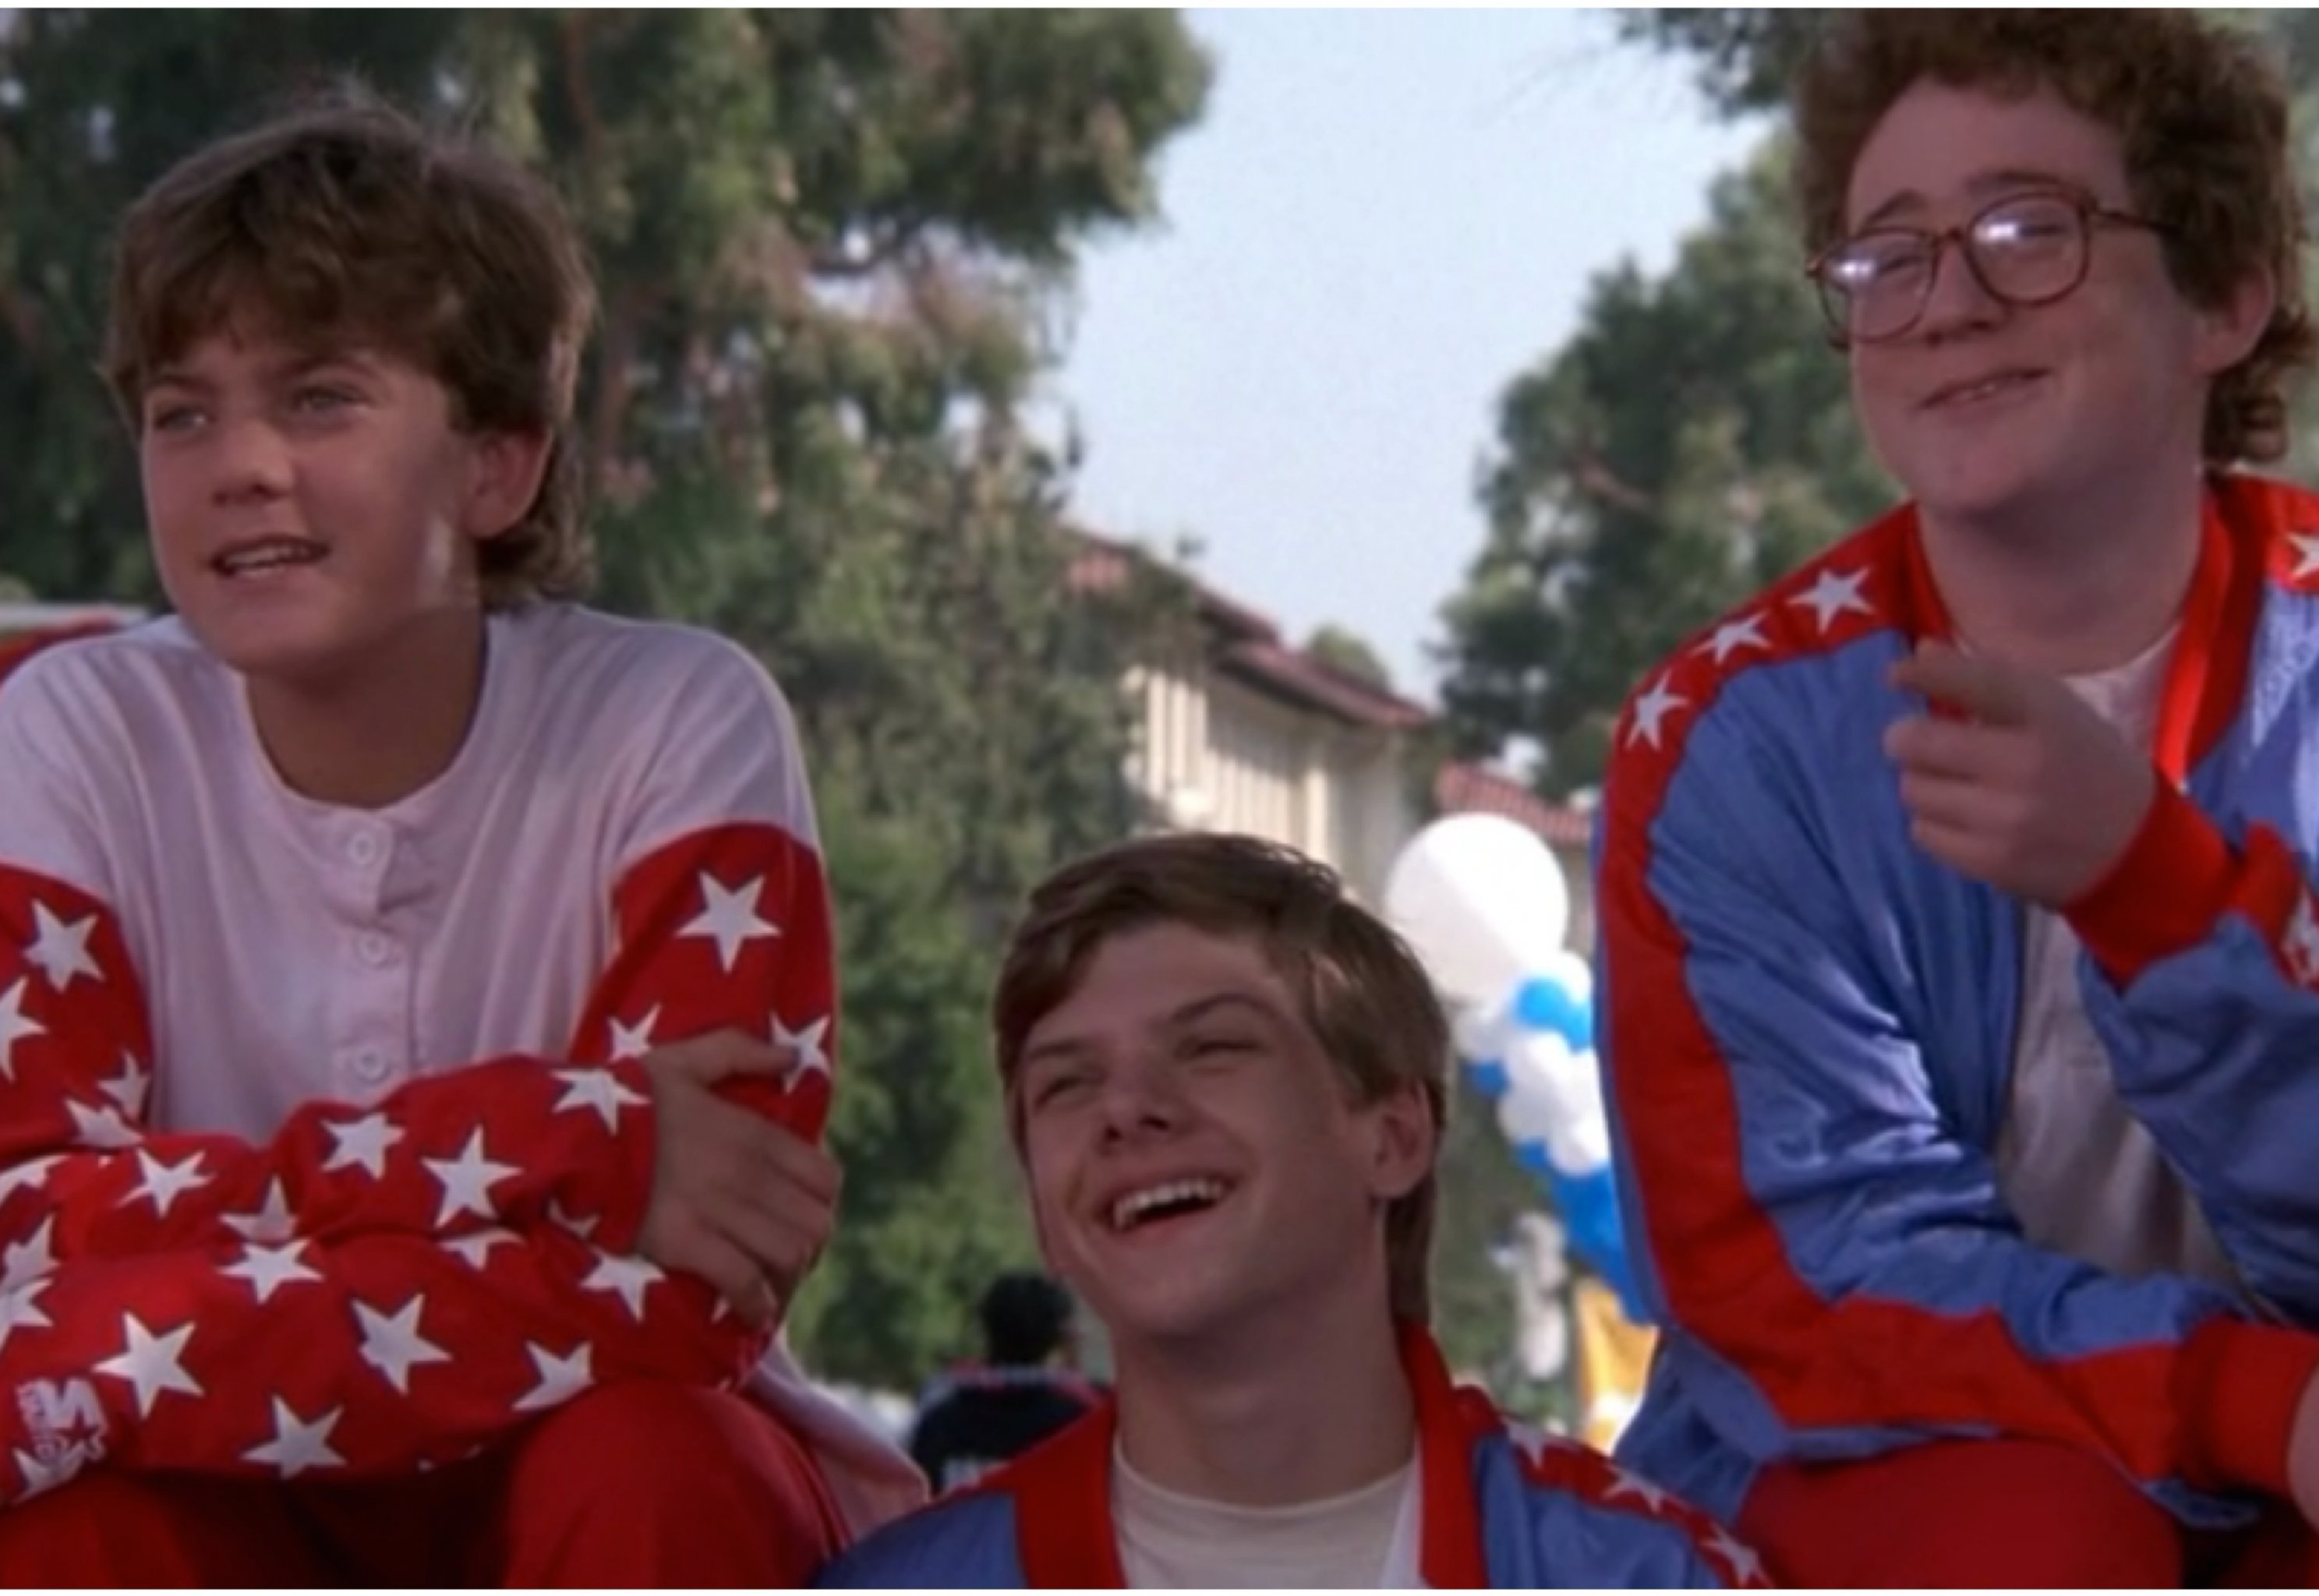 25 Things You Never Knew About the Mighty Ducks Trilogy